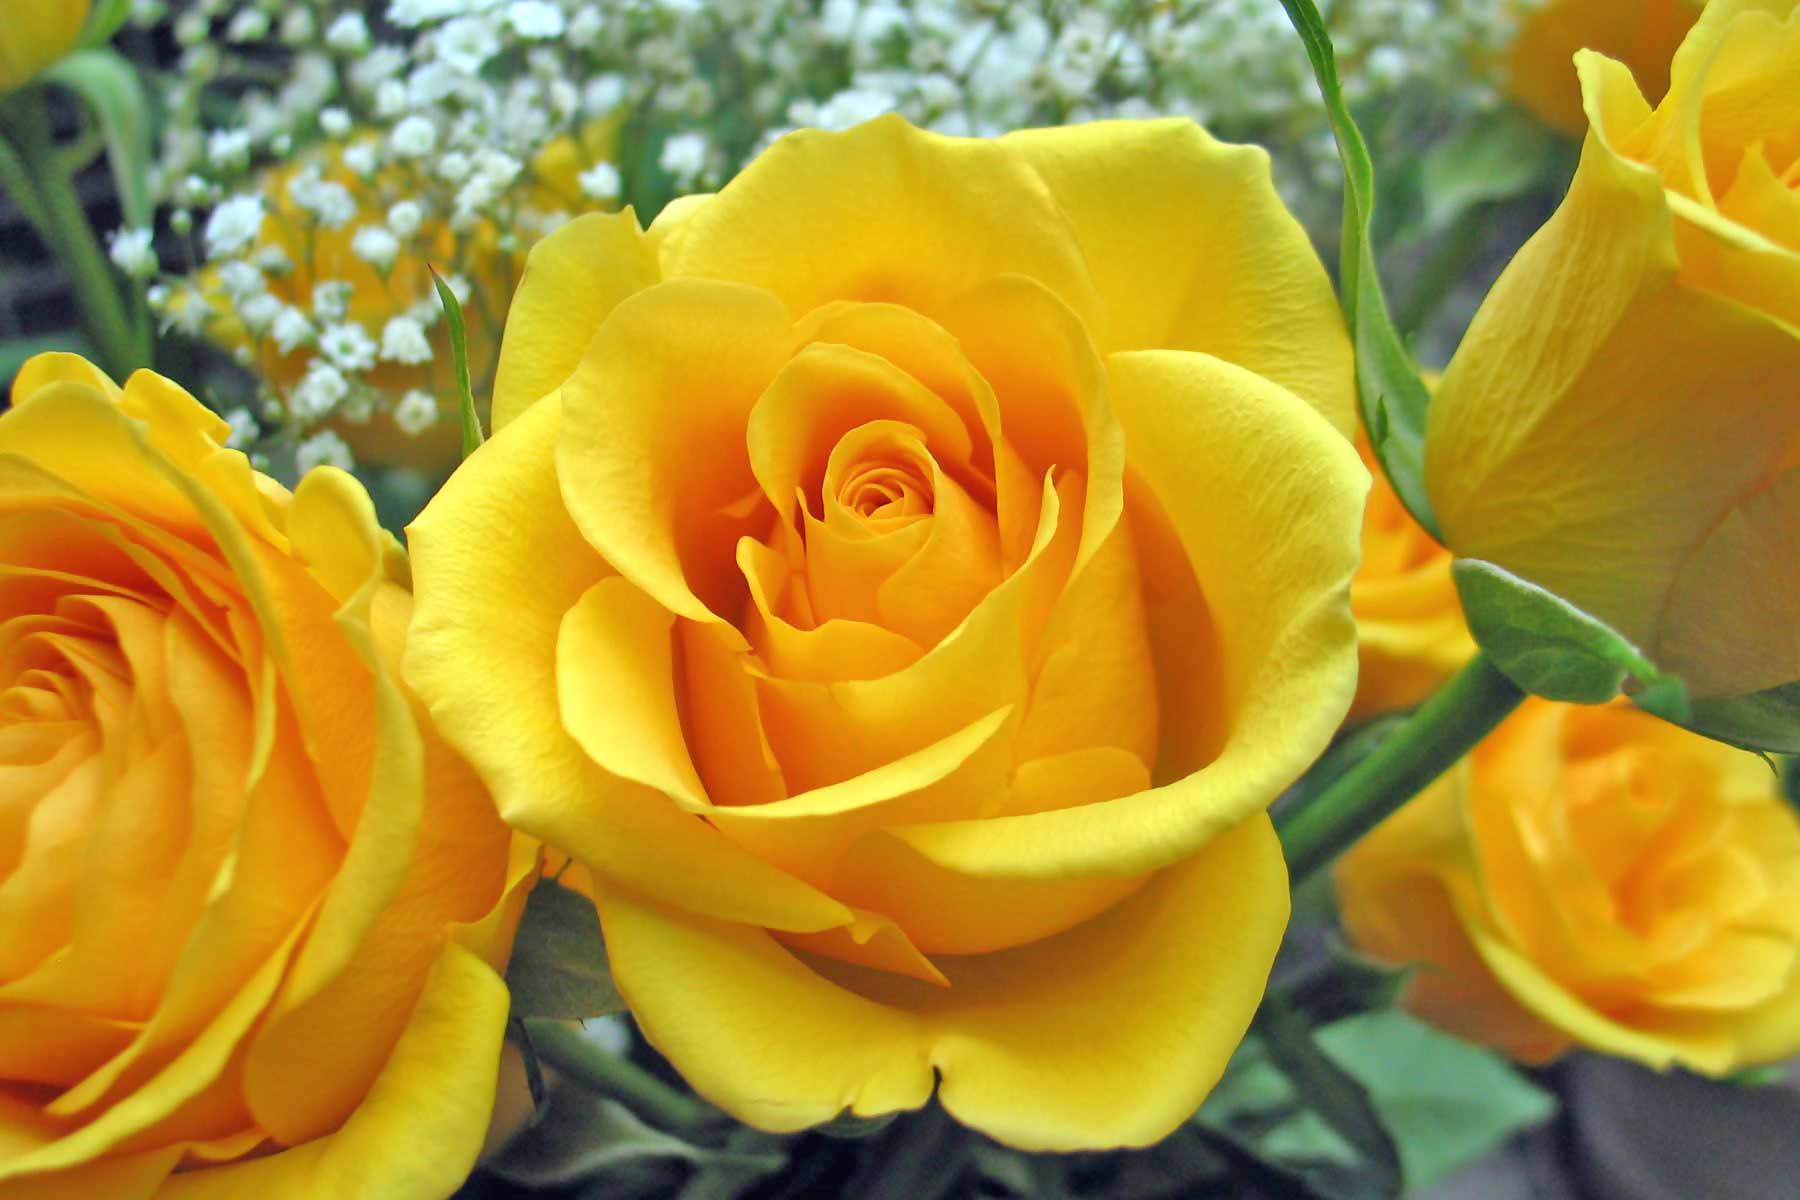 Enjoy the beautiful pictures of roses Just have a look